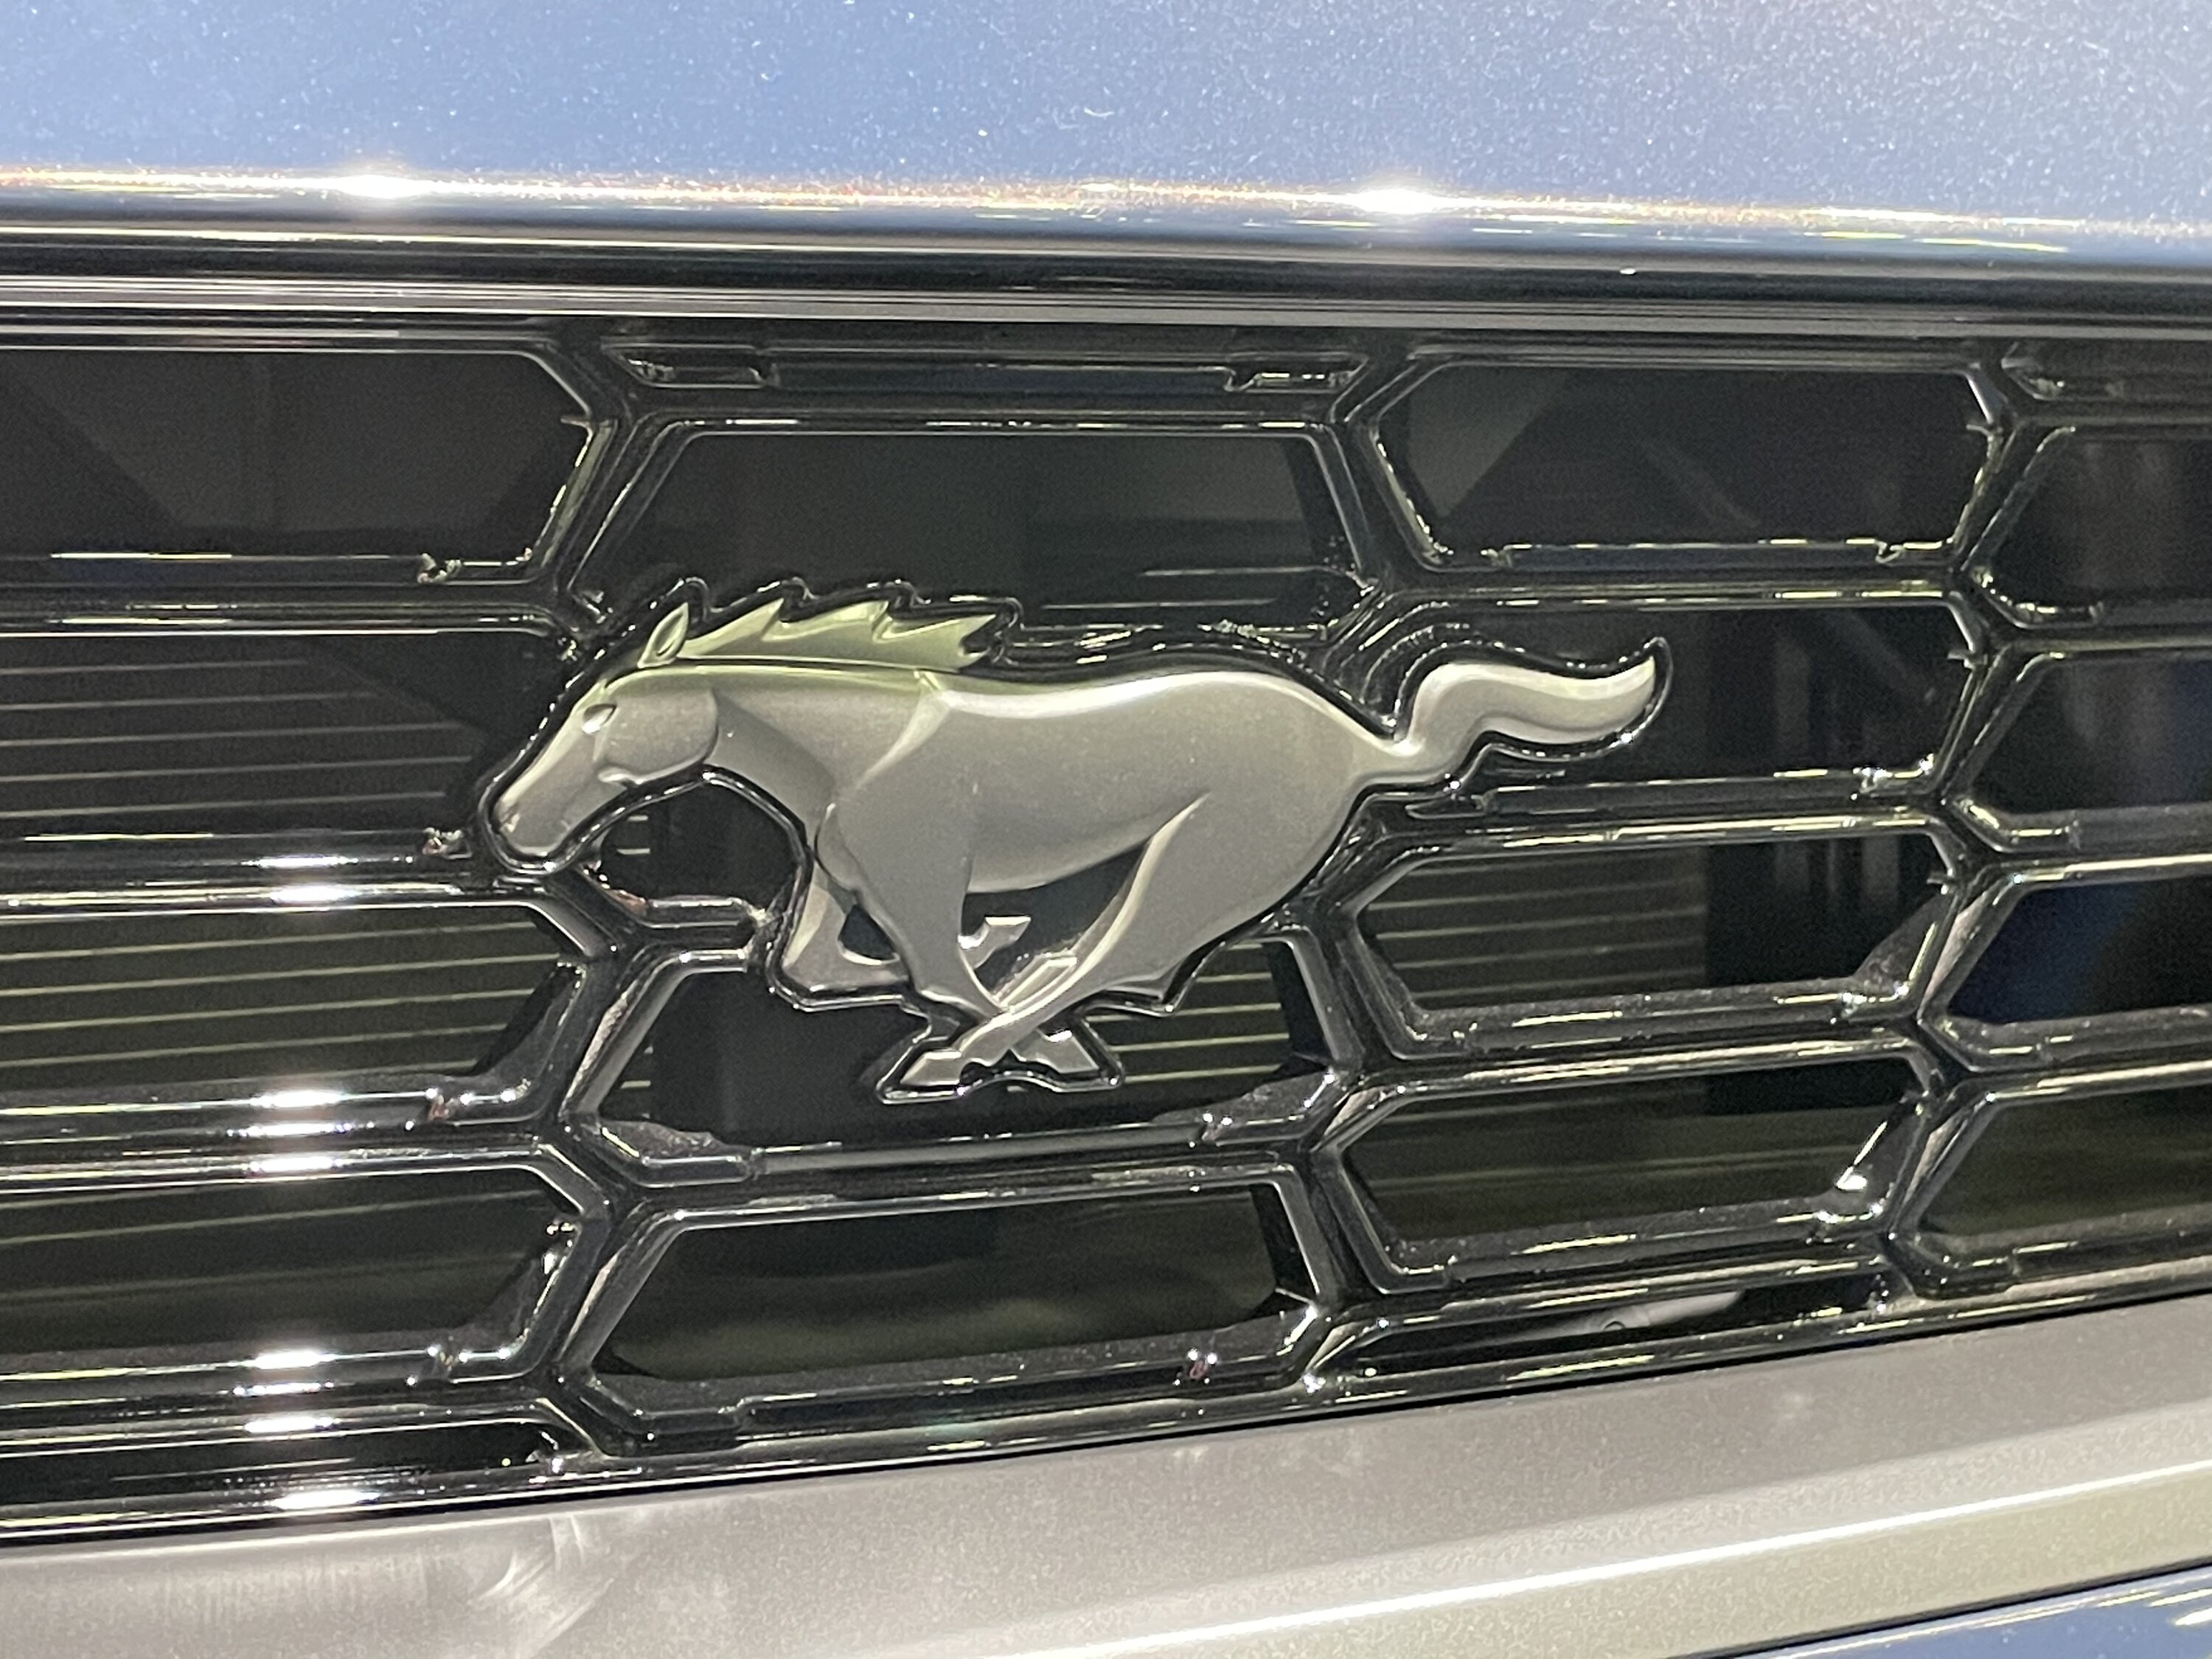 S650 Mustang S650 pics from reveal night and showfloor of 2022 Detroit Auto Show a0c3e947-a966-4926-aca8-828ef813b18a-jpeg-